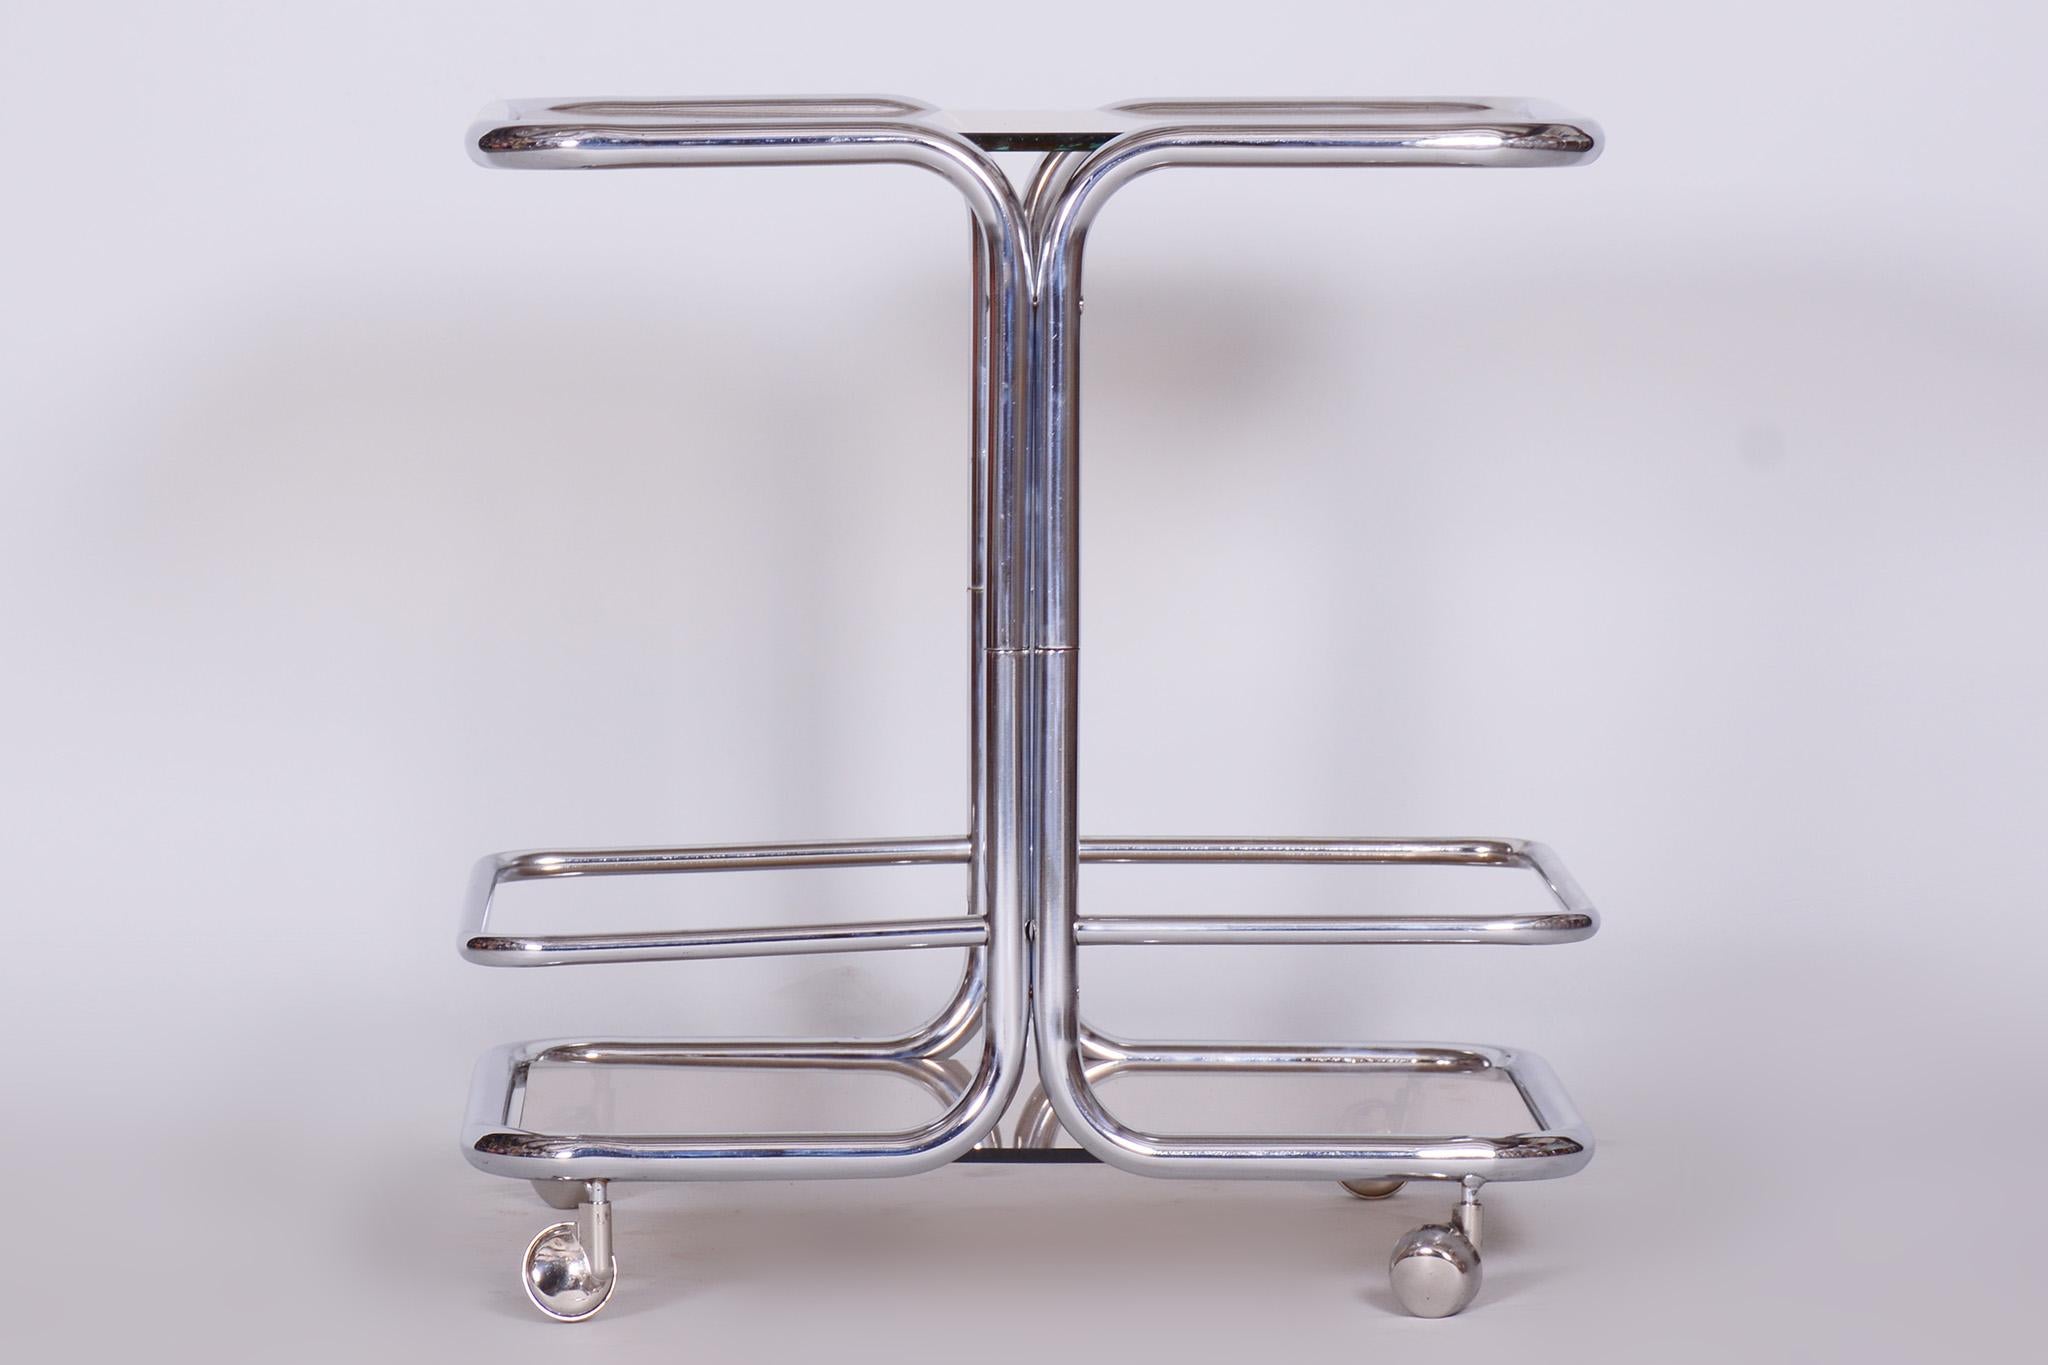 Mid-Century Modern Original Midcentury Chrome Serving Trolley, Smoked Glass, 1960s, Czechia For Sale